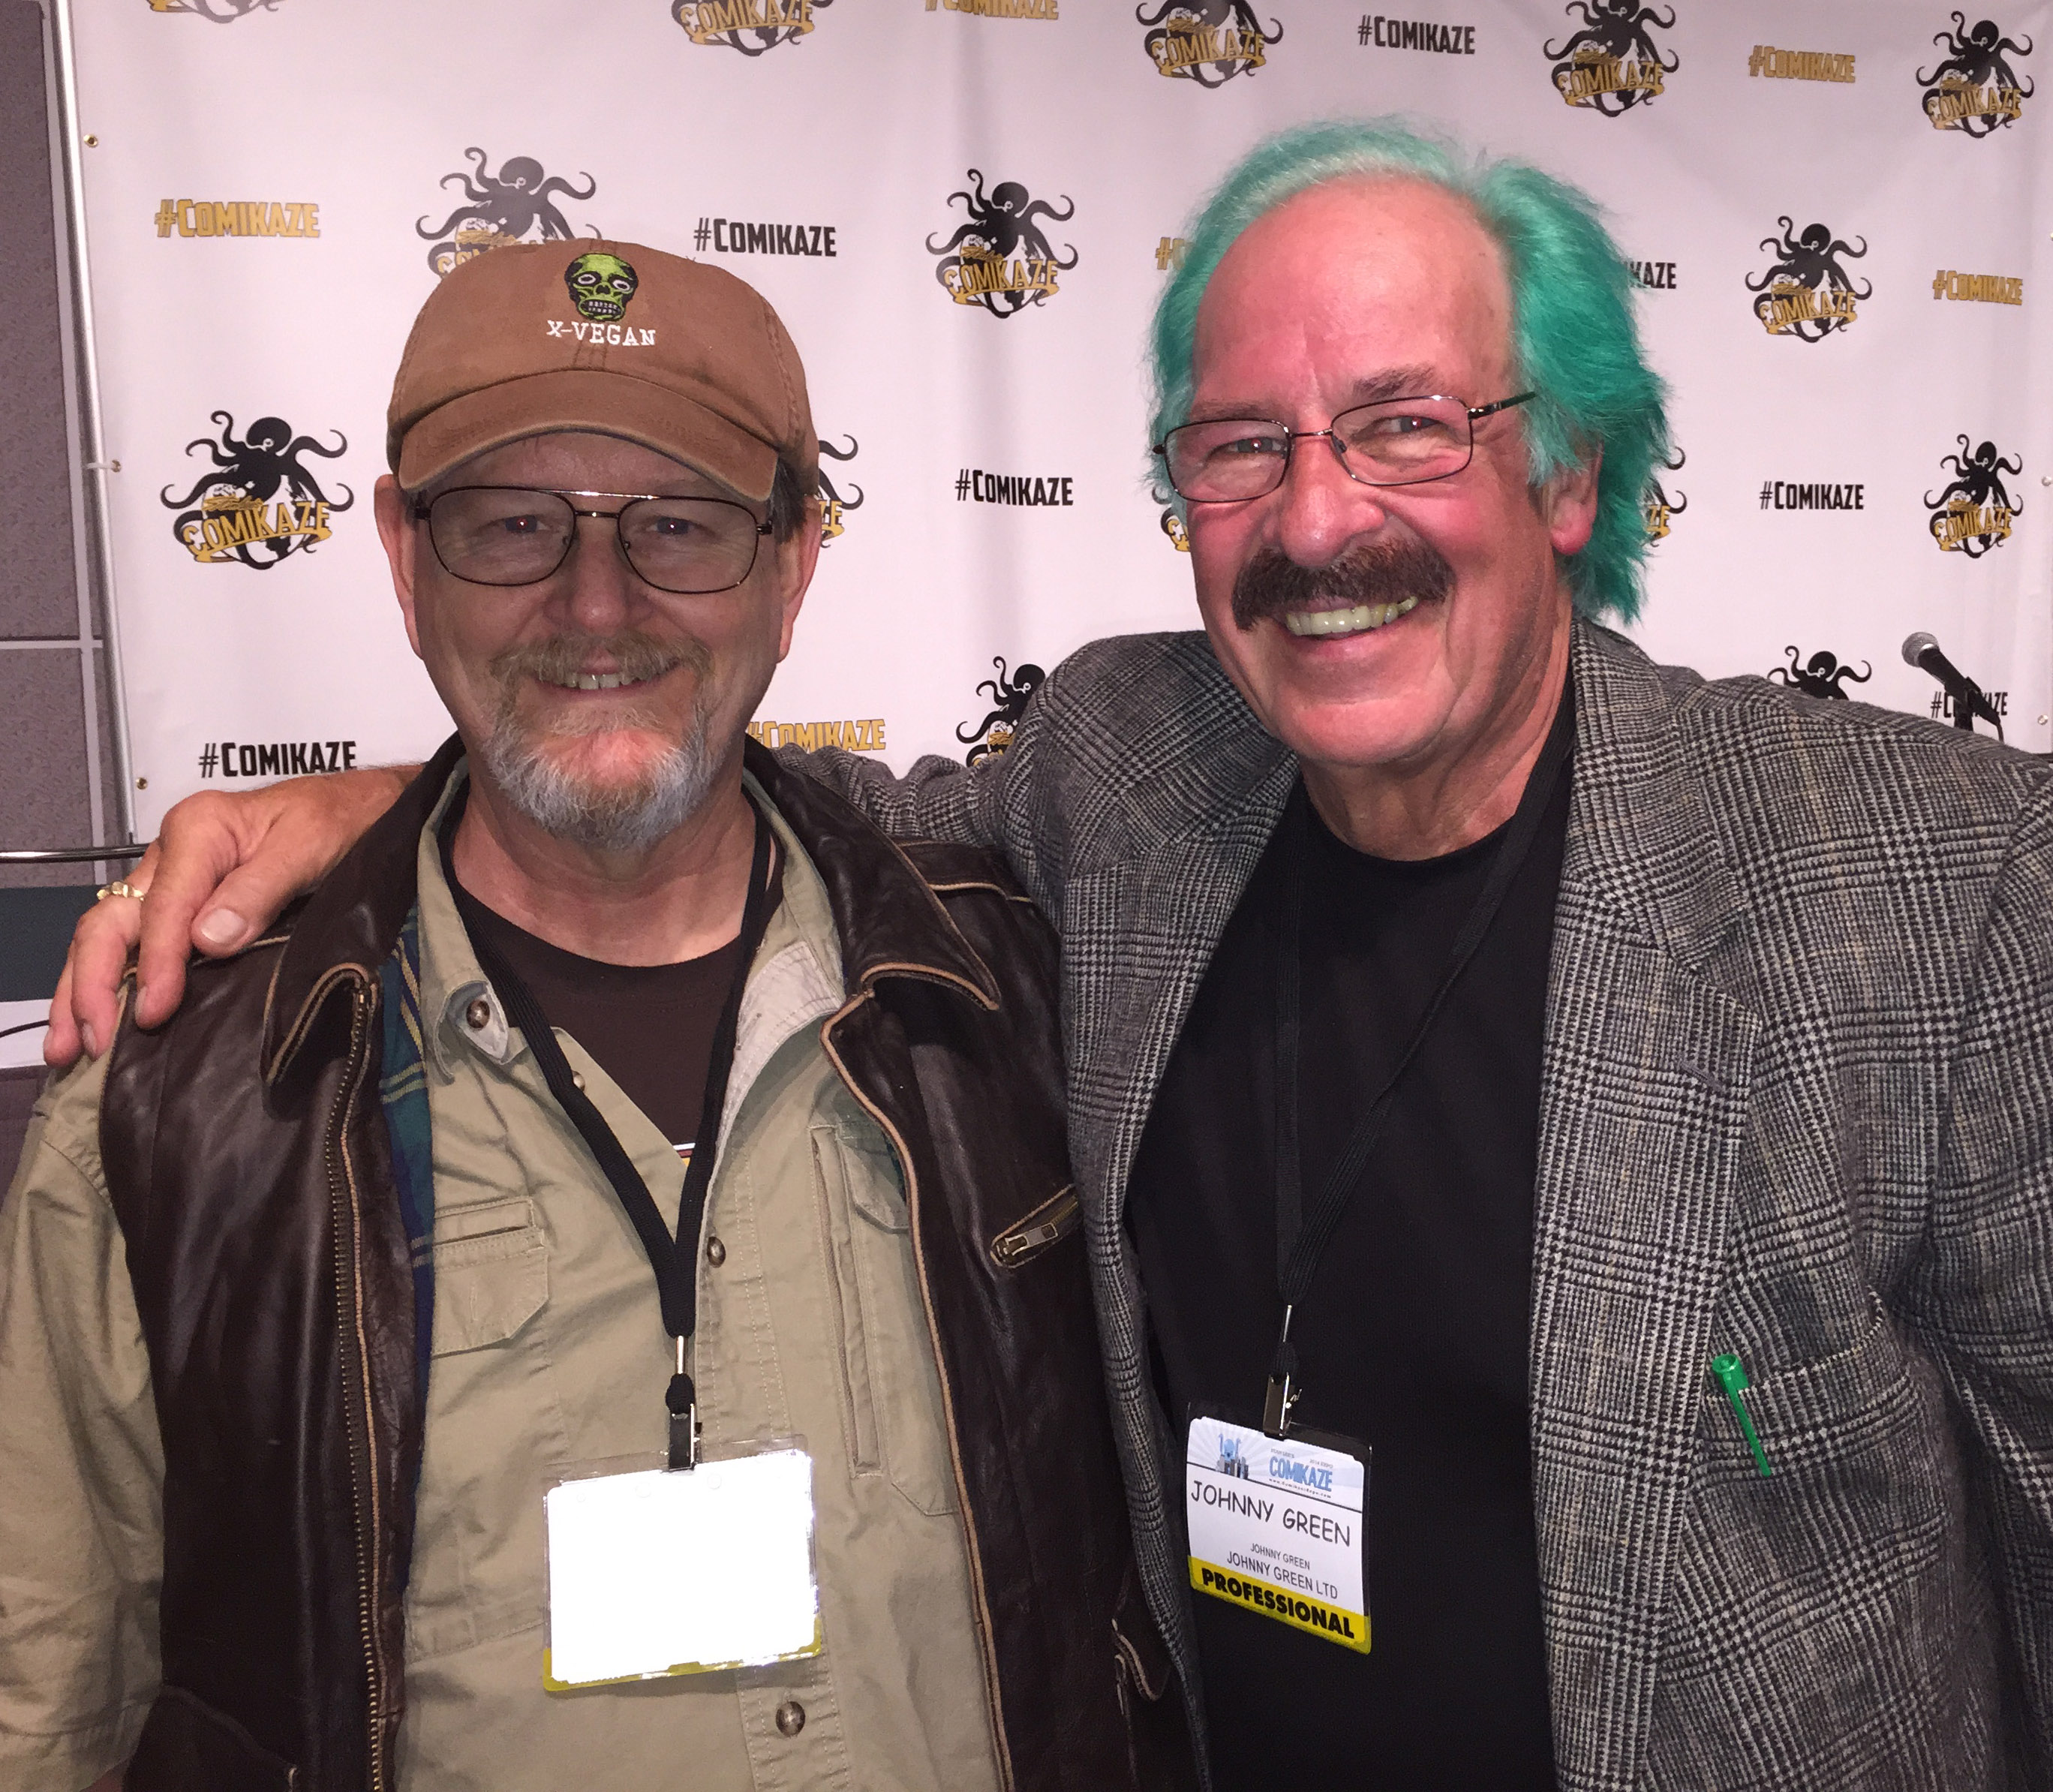 I'm pictured with Johnny Green at the 2014 Stan Lee Comikaze Convention